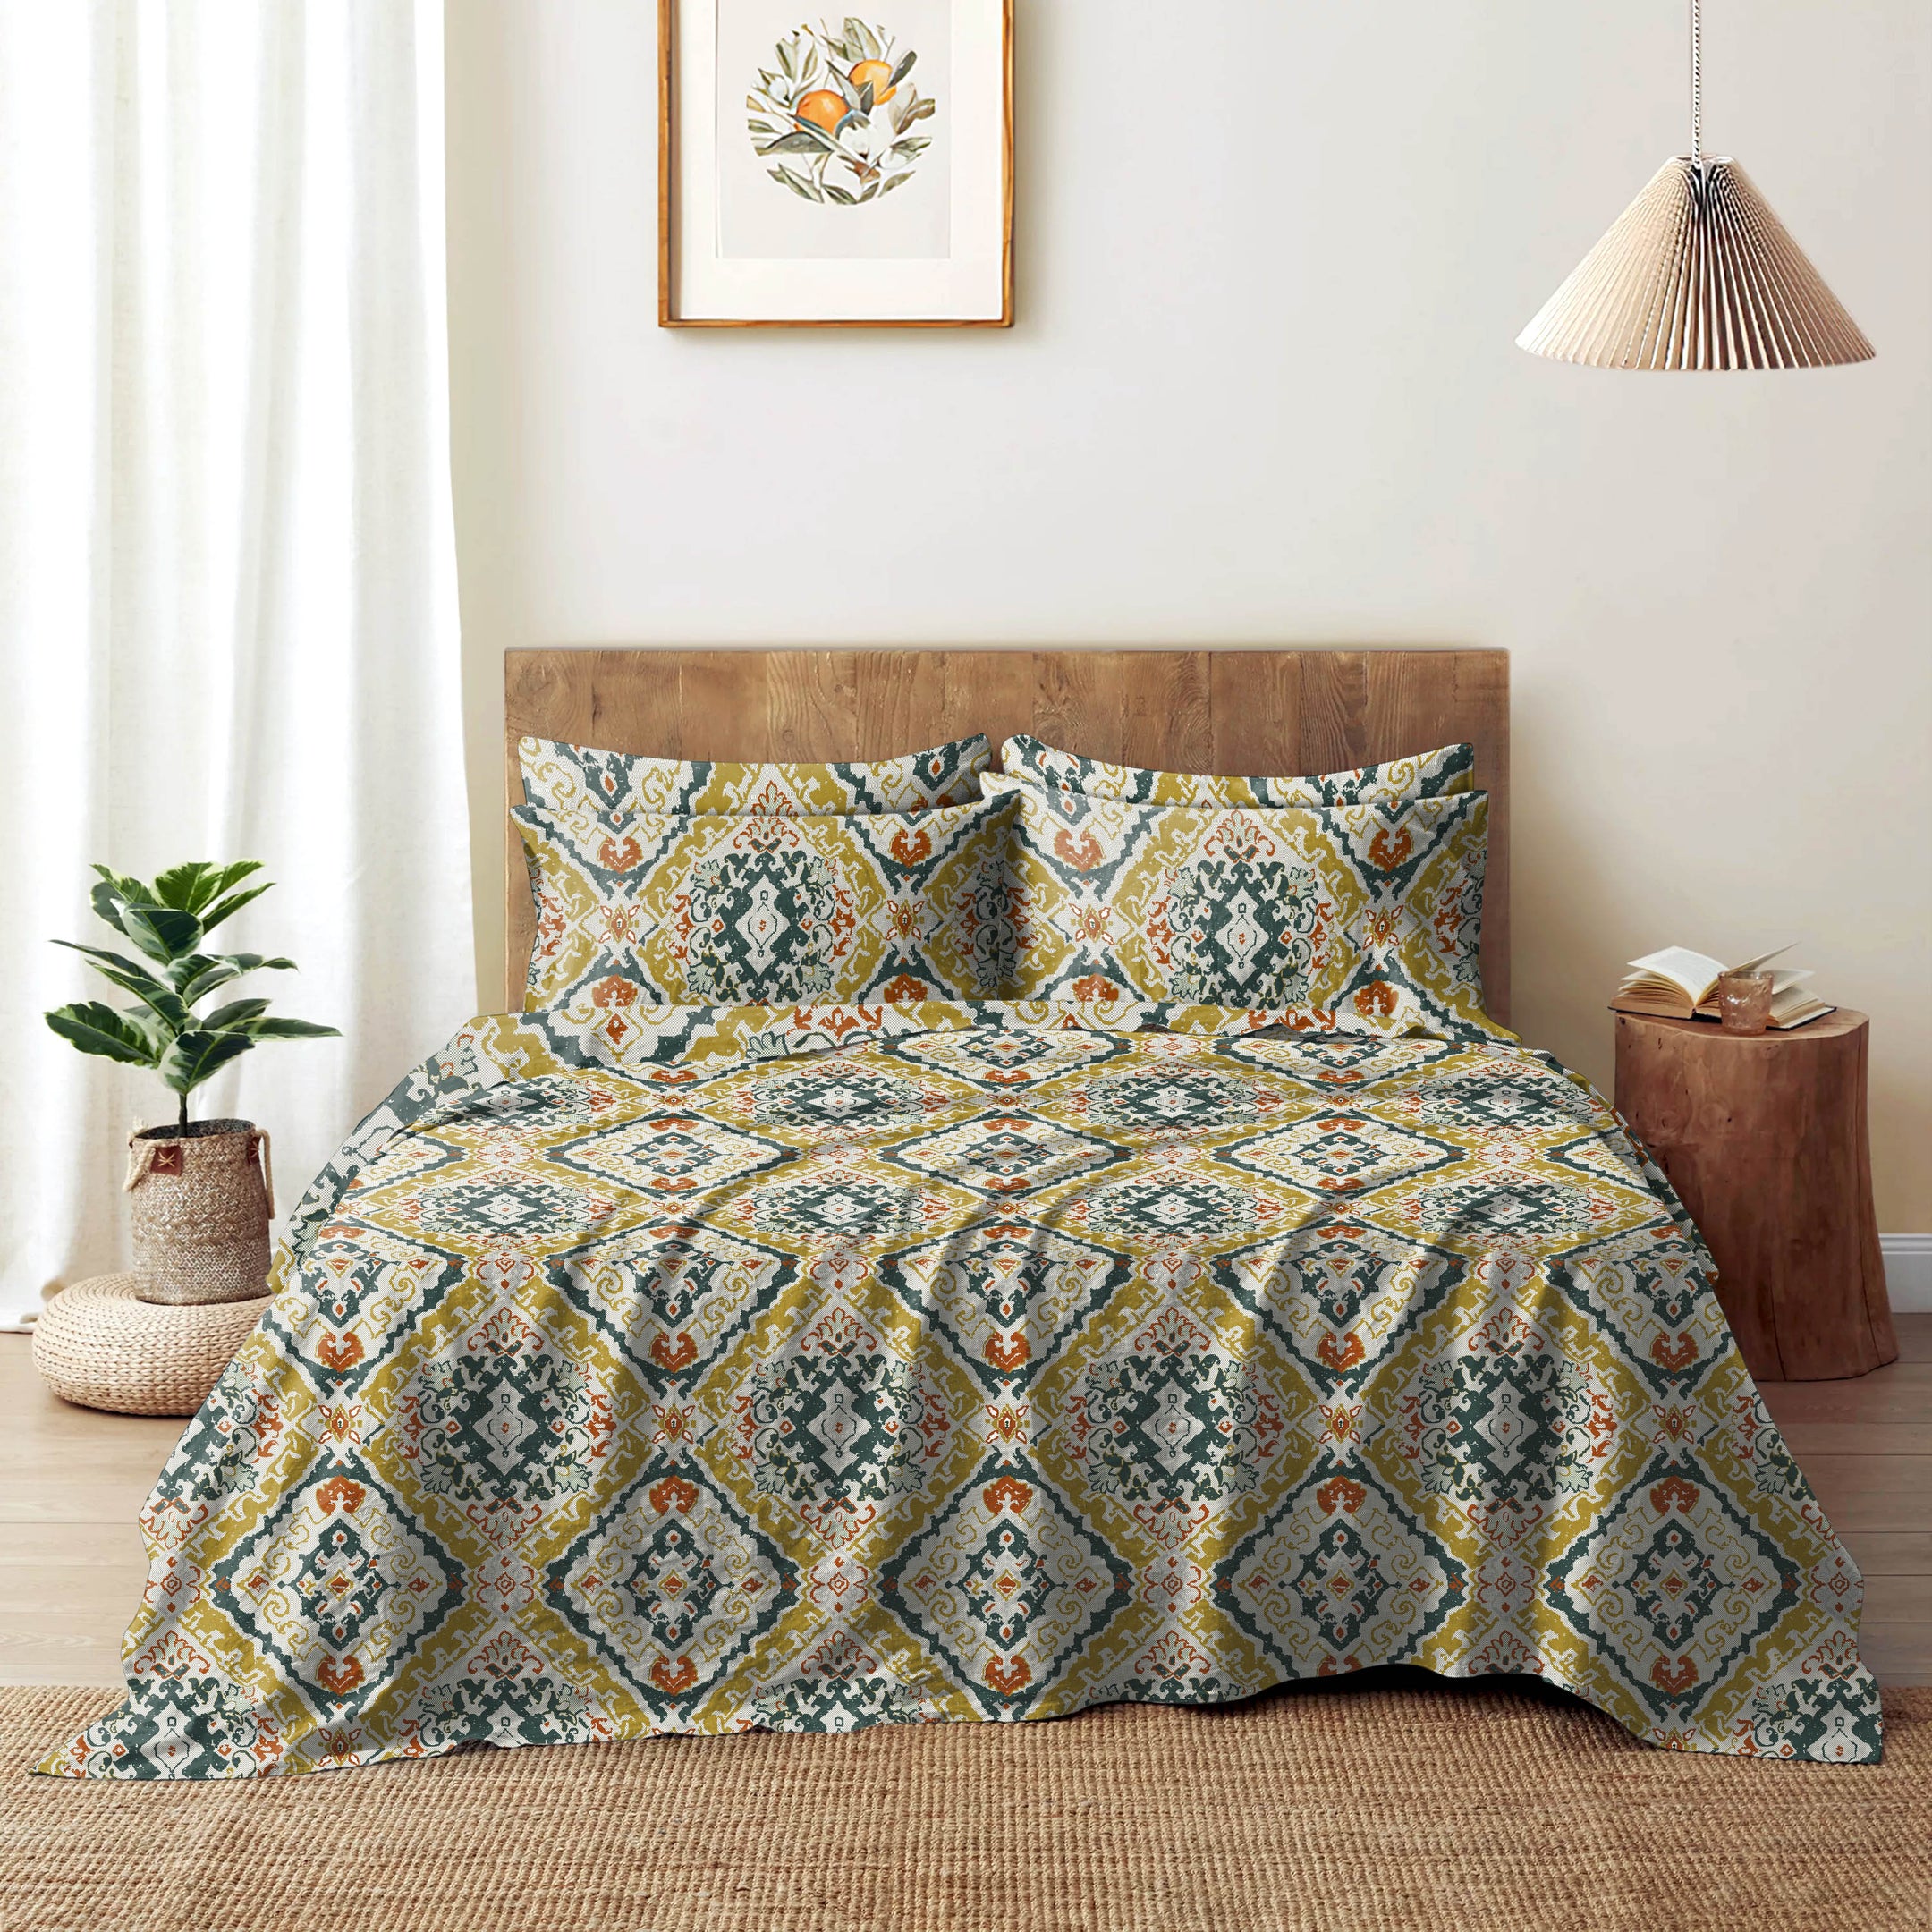 MOROCCO CORN BEDCOVER FOR DOUBLE BED WITH 2 PILLOWCOVERS KING SIZE (104" X 90")